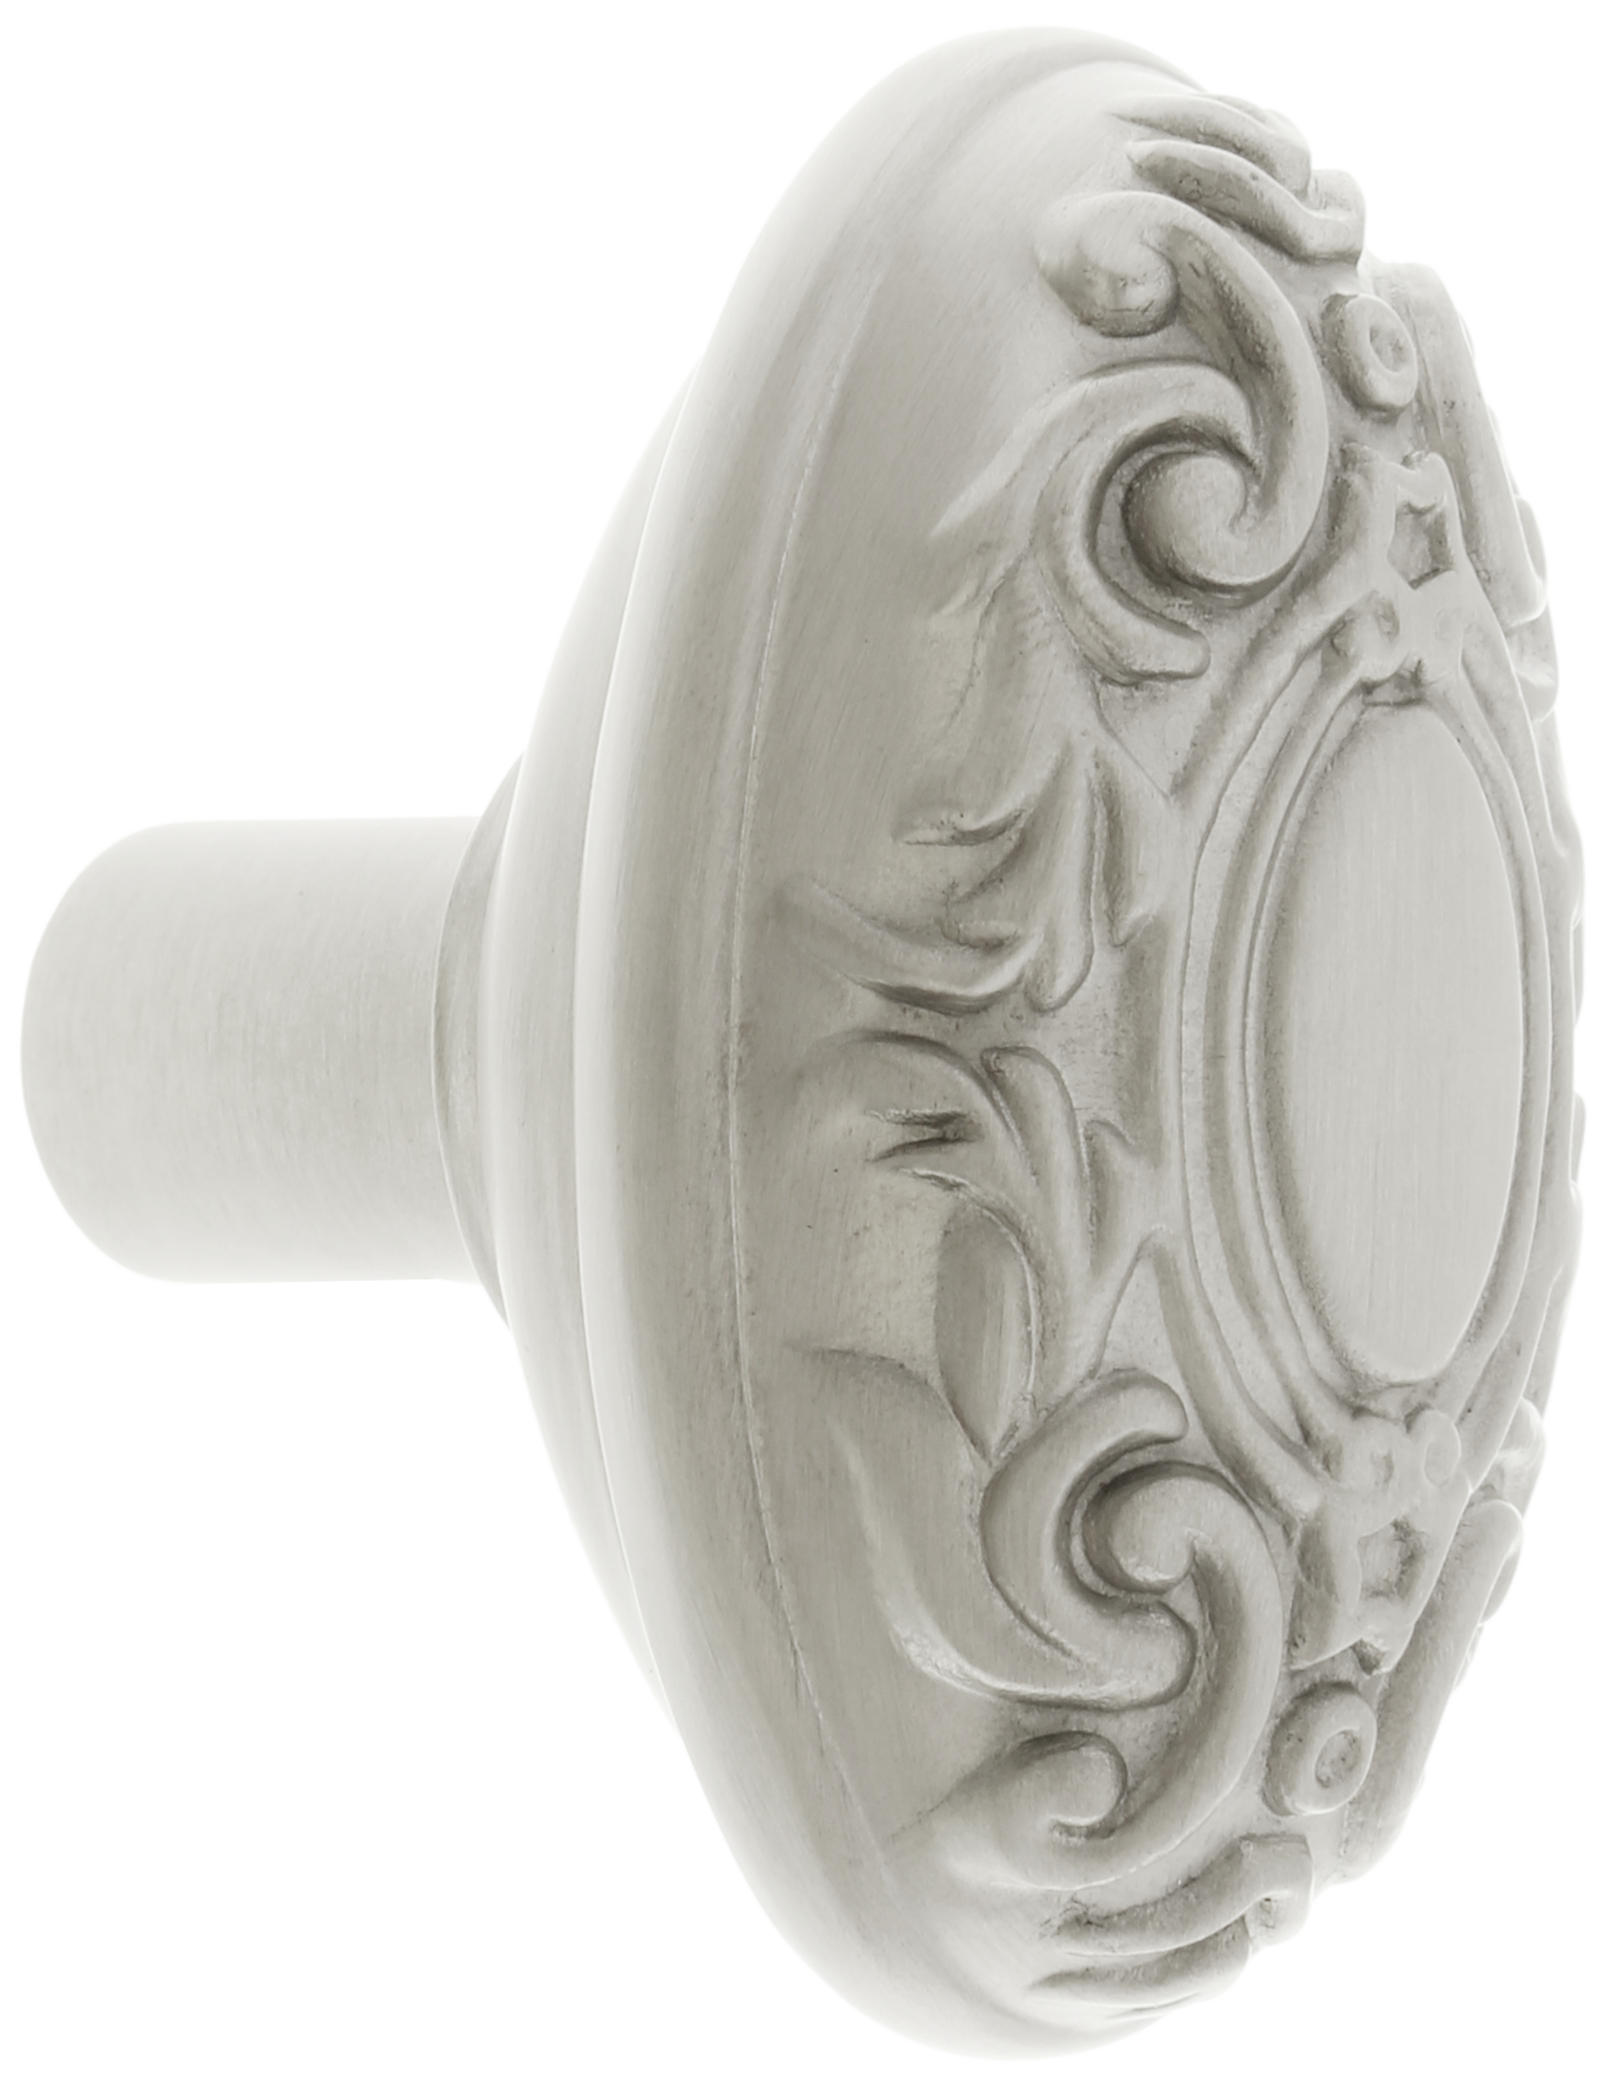 Alternate View 3 LGPNG of Pair of Oval Victorian Door Knobs In Solid Brass.